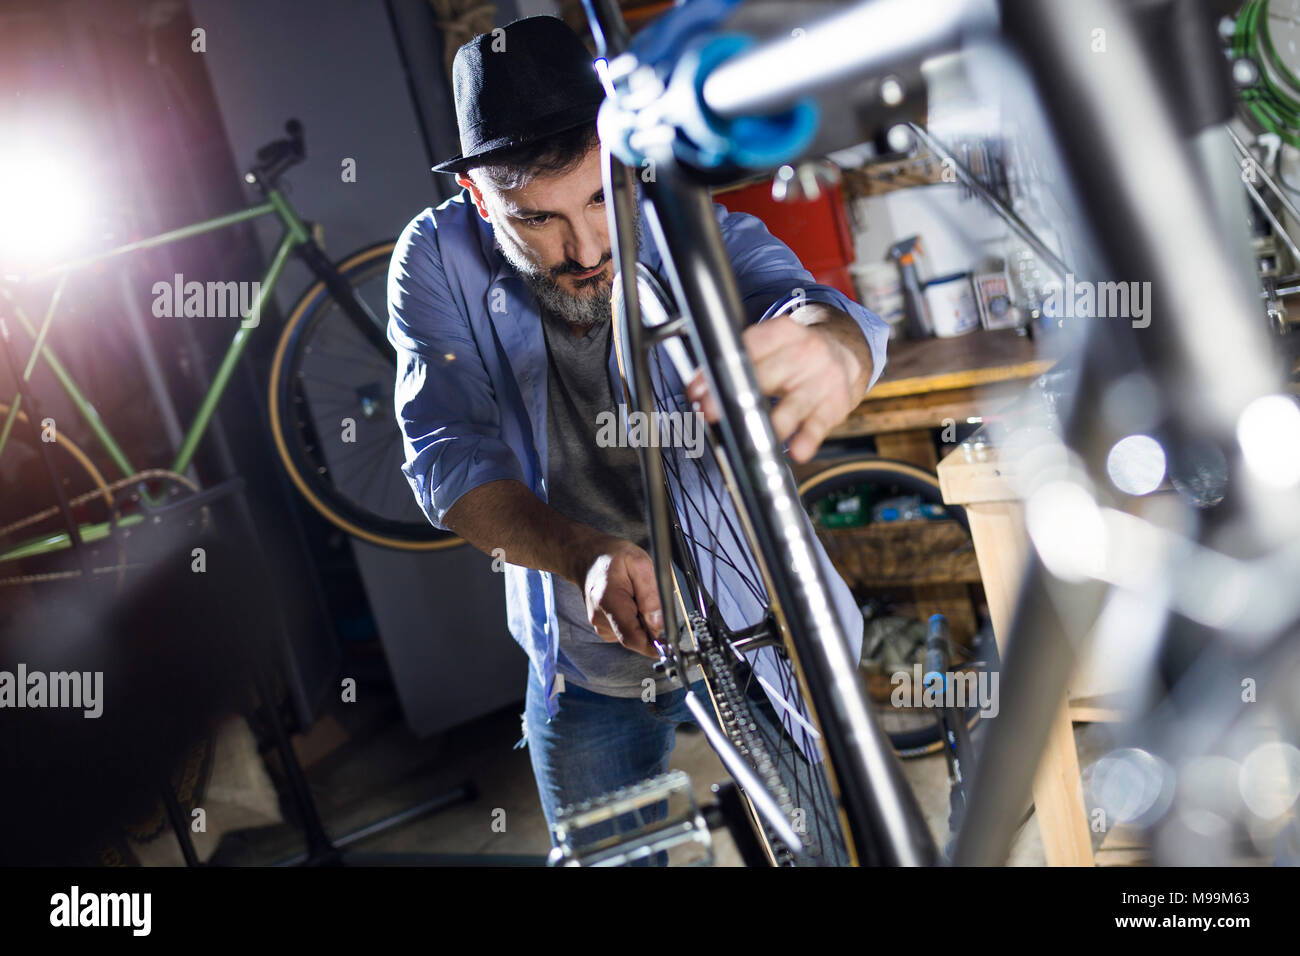 Man working on bicycle in workshop Banque D'Images